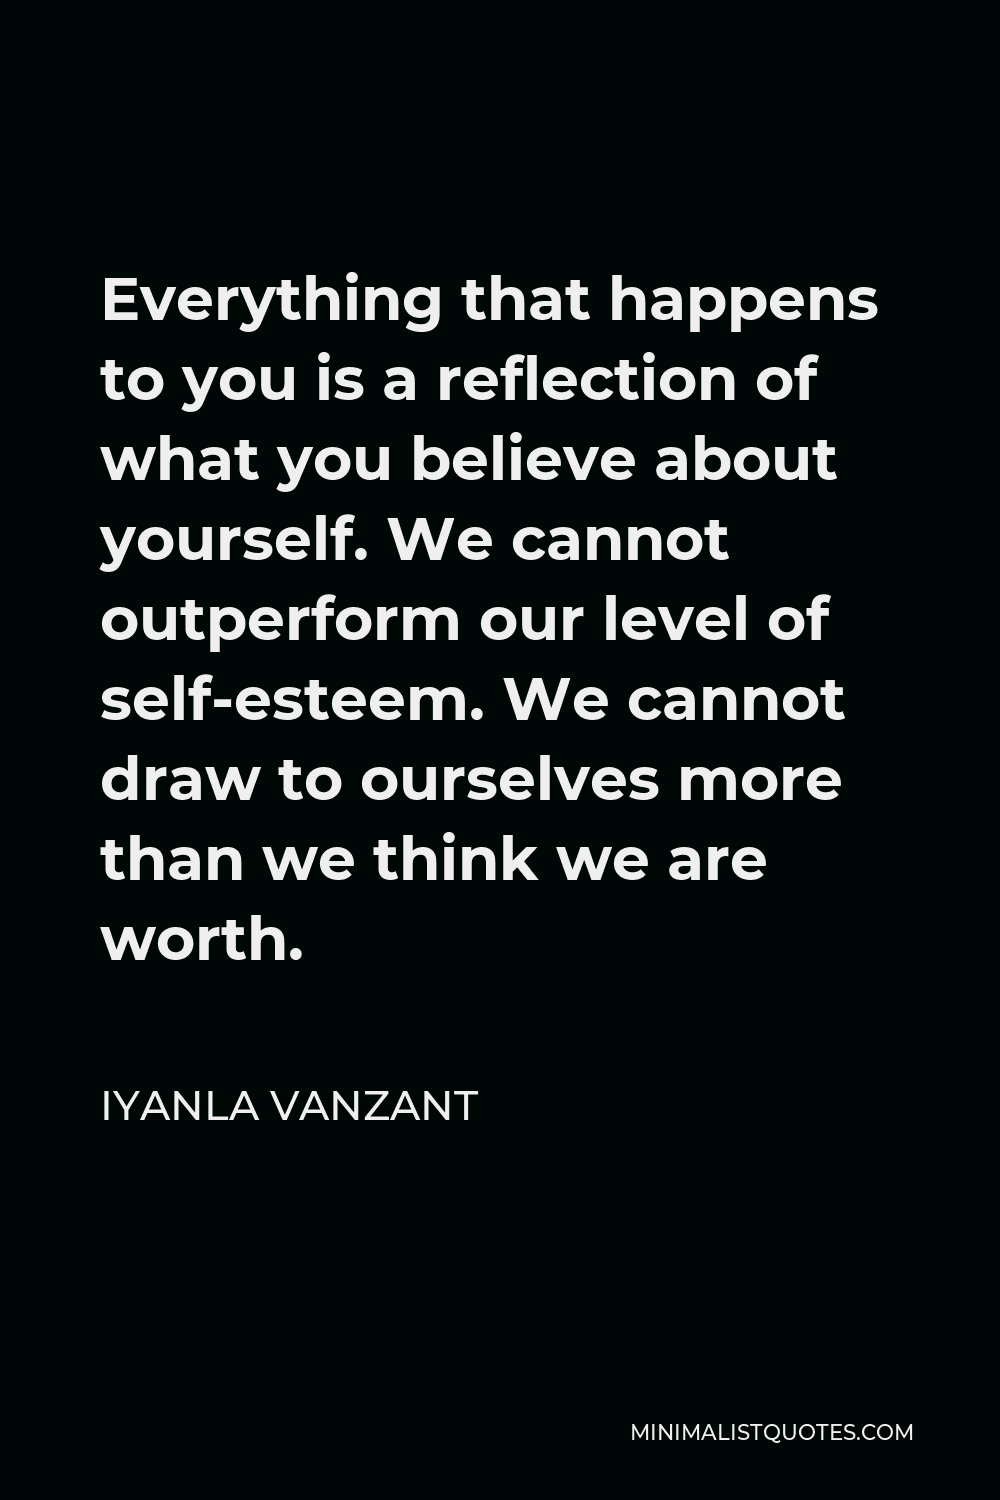 Iyanla Vanzant Quote - Everything that happens to you is a reflection of what you believe about yourself. We cannot outperform our level of self-esteem. We cannot draw to ourselves more than we think we are worth.